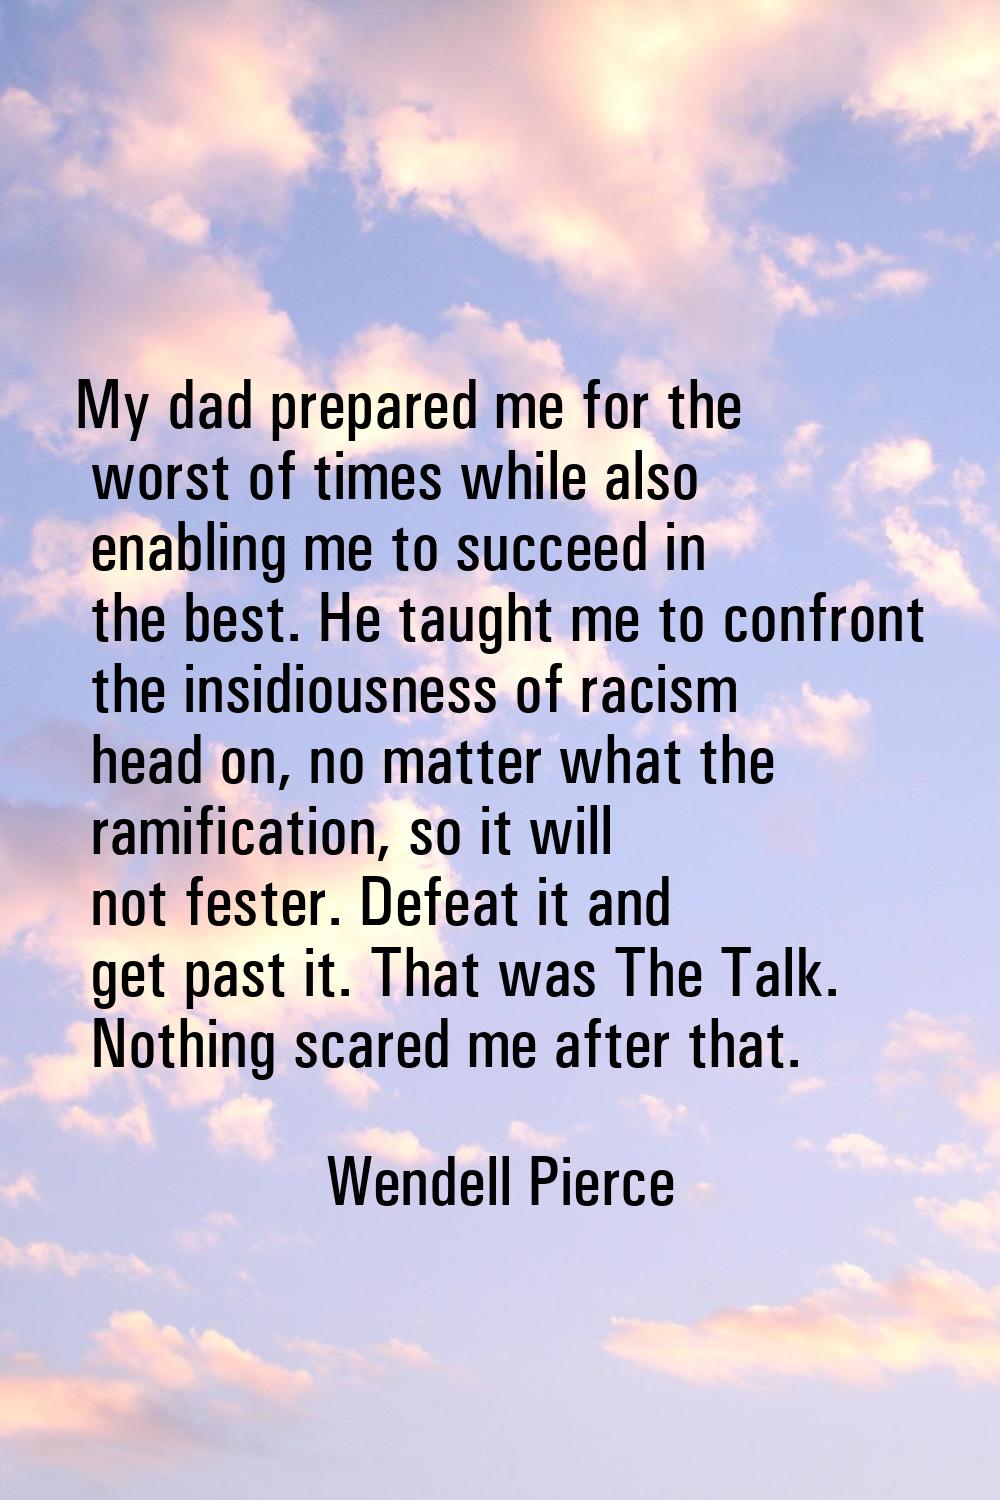 My dad prepared me for the worst of times while also enabling me to succeed in the best. He taught 